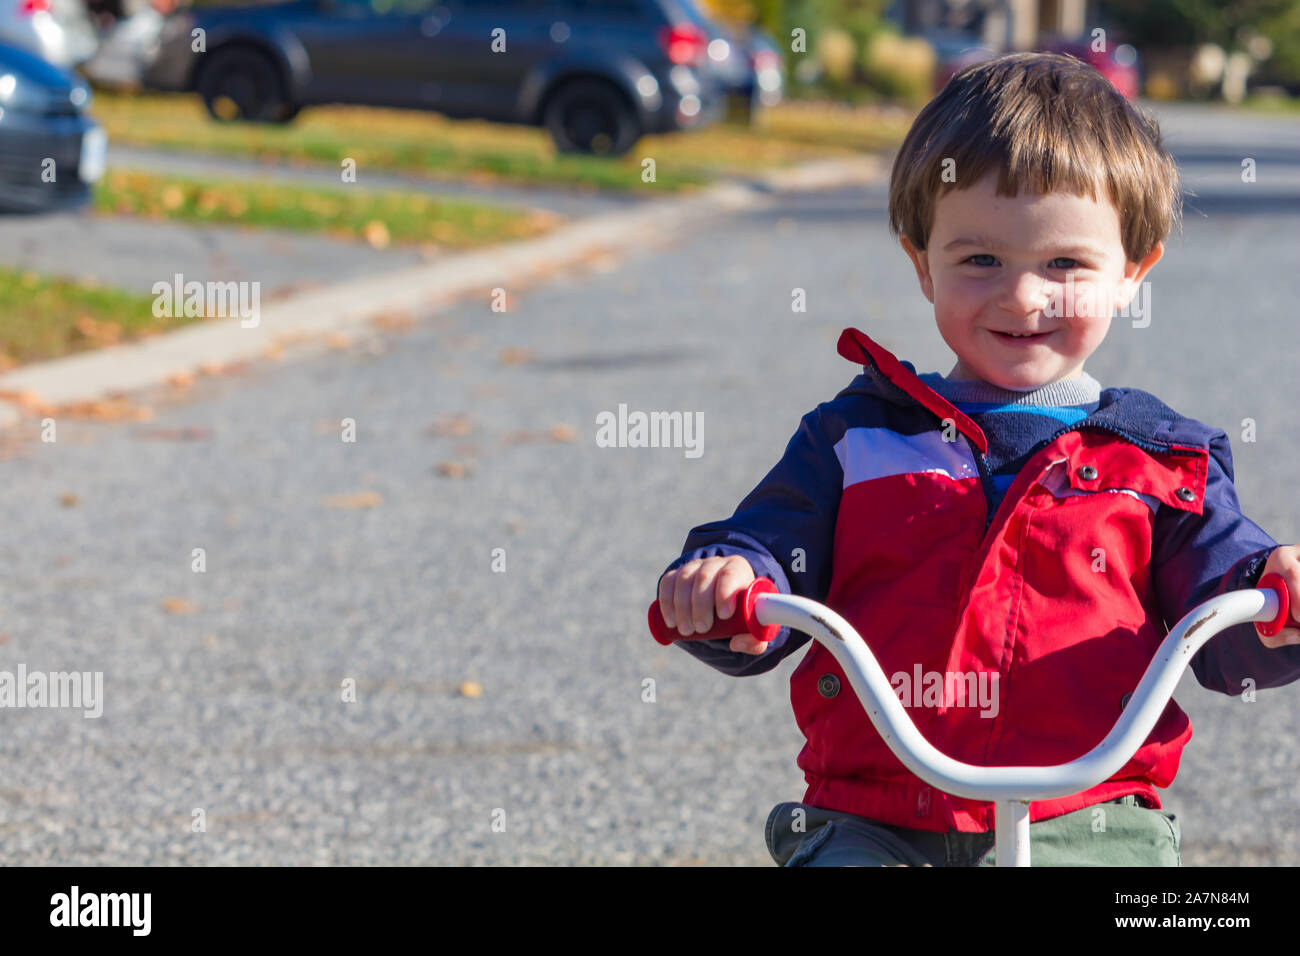 A young toddler, a 2-year-old, rides a tricycle down a suburban street. The little boy smiles as he goes, wearing a light jacket for fall or spring we Stock Photo